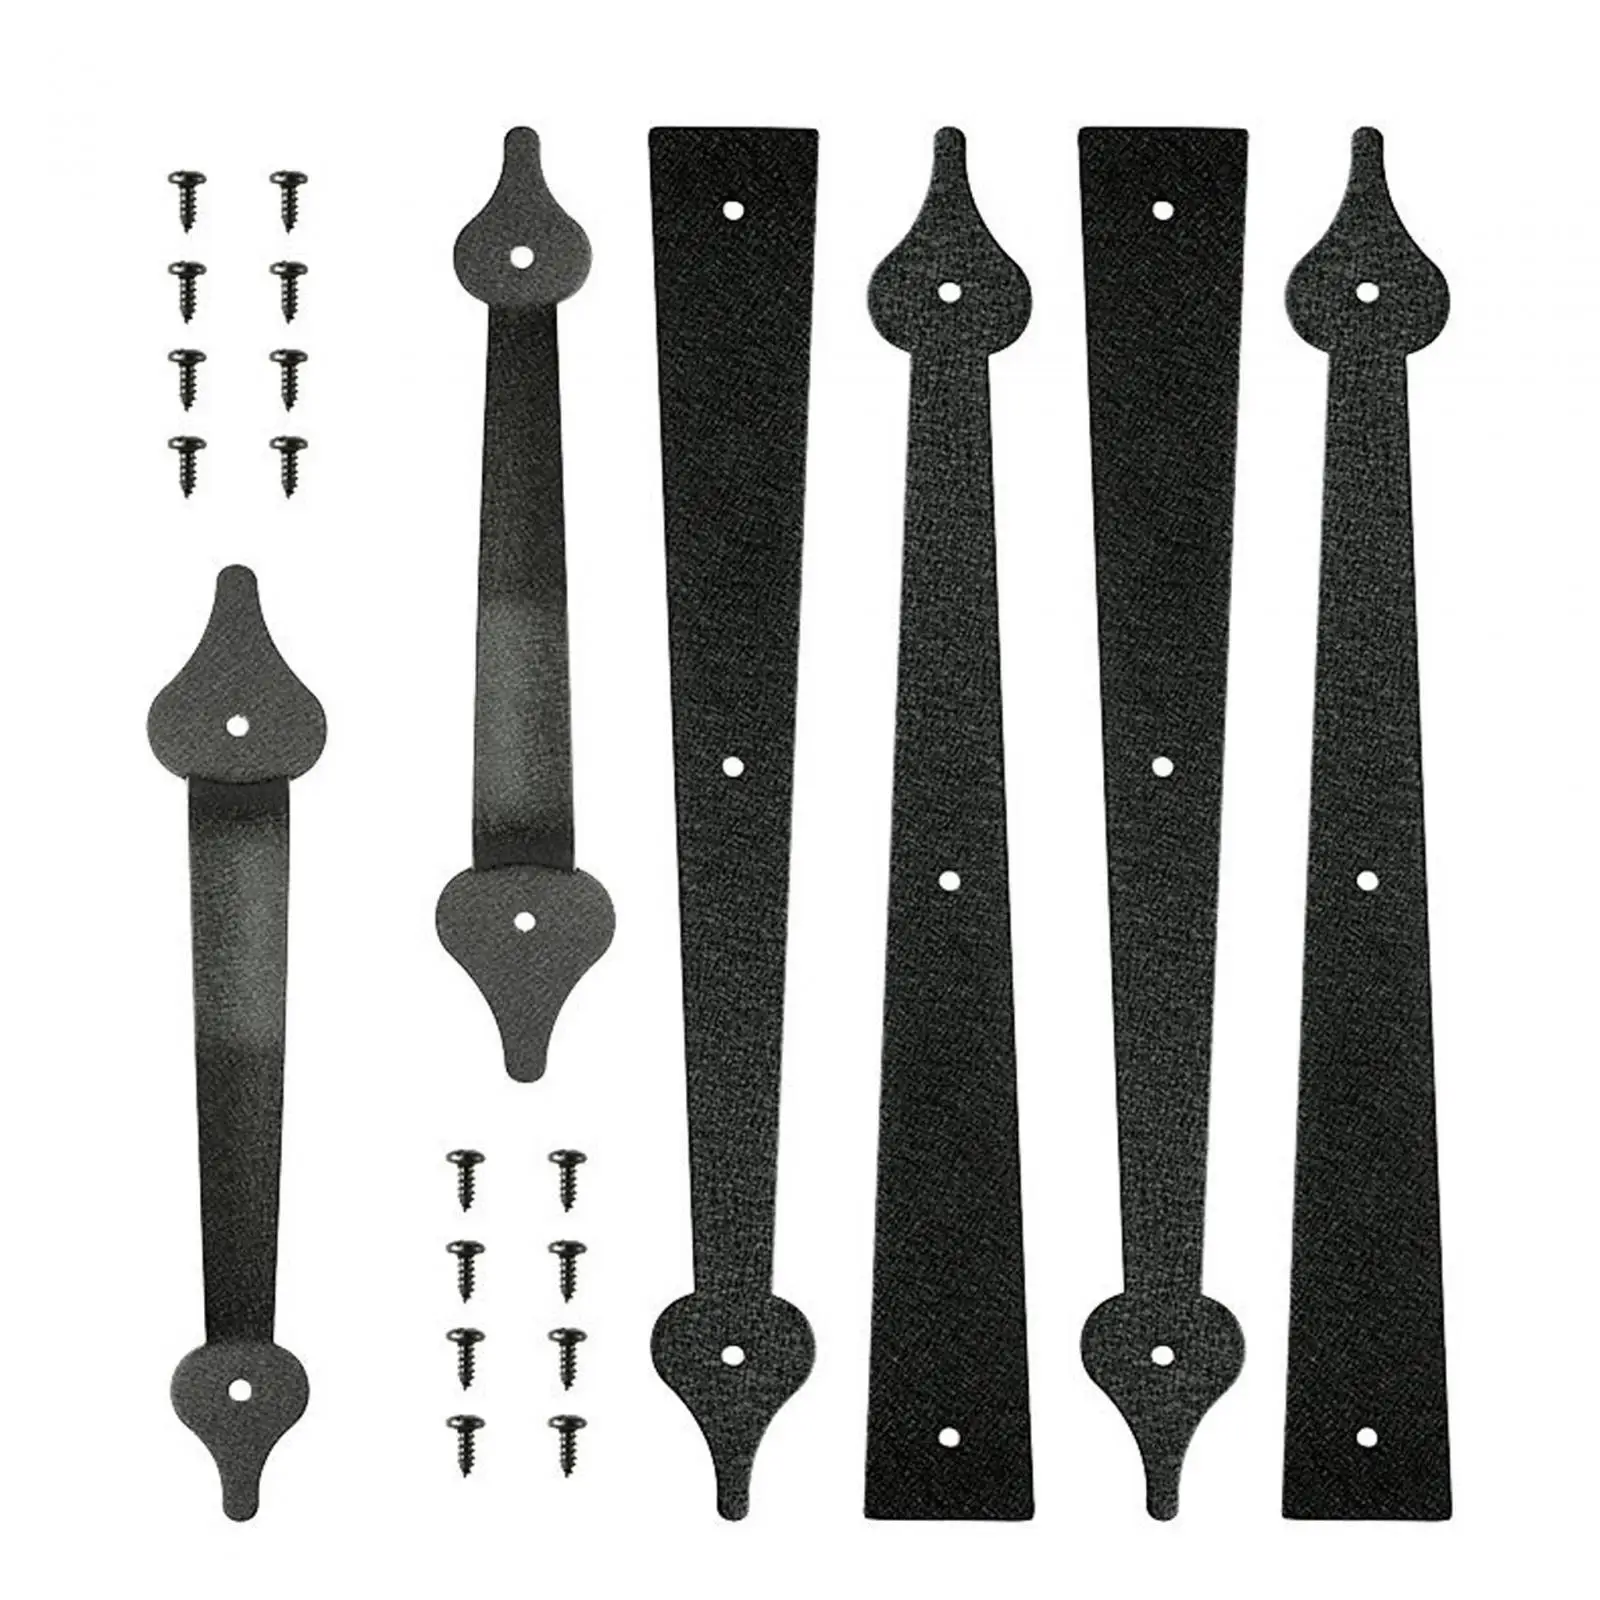 6Pcs Garage Handle Interior Door Gate Hardware Cabinet Rustic with Hinge Magnets Easy Install with Screws 4 Hinges 2 Handles